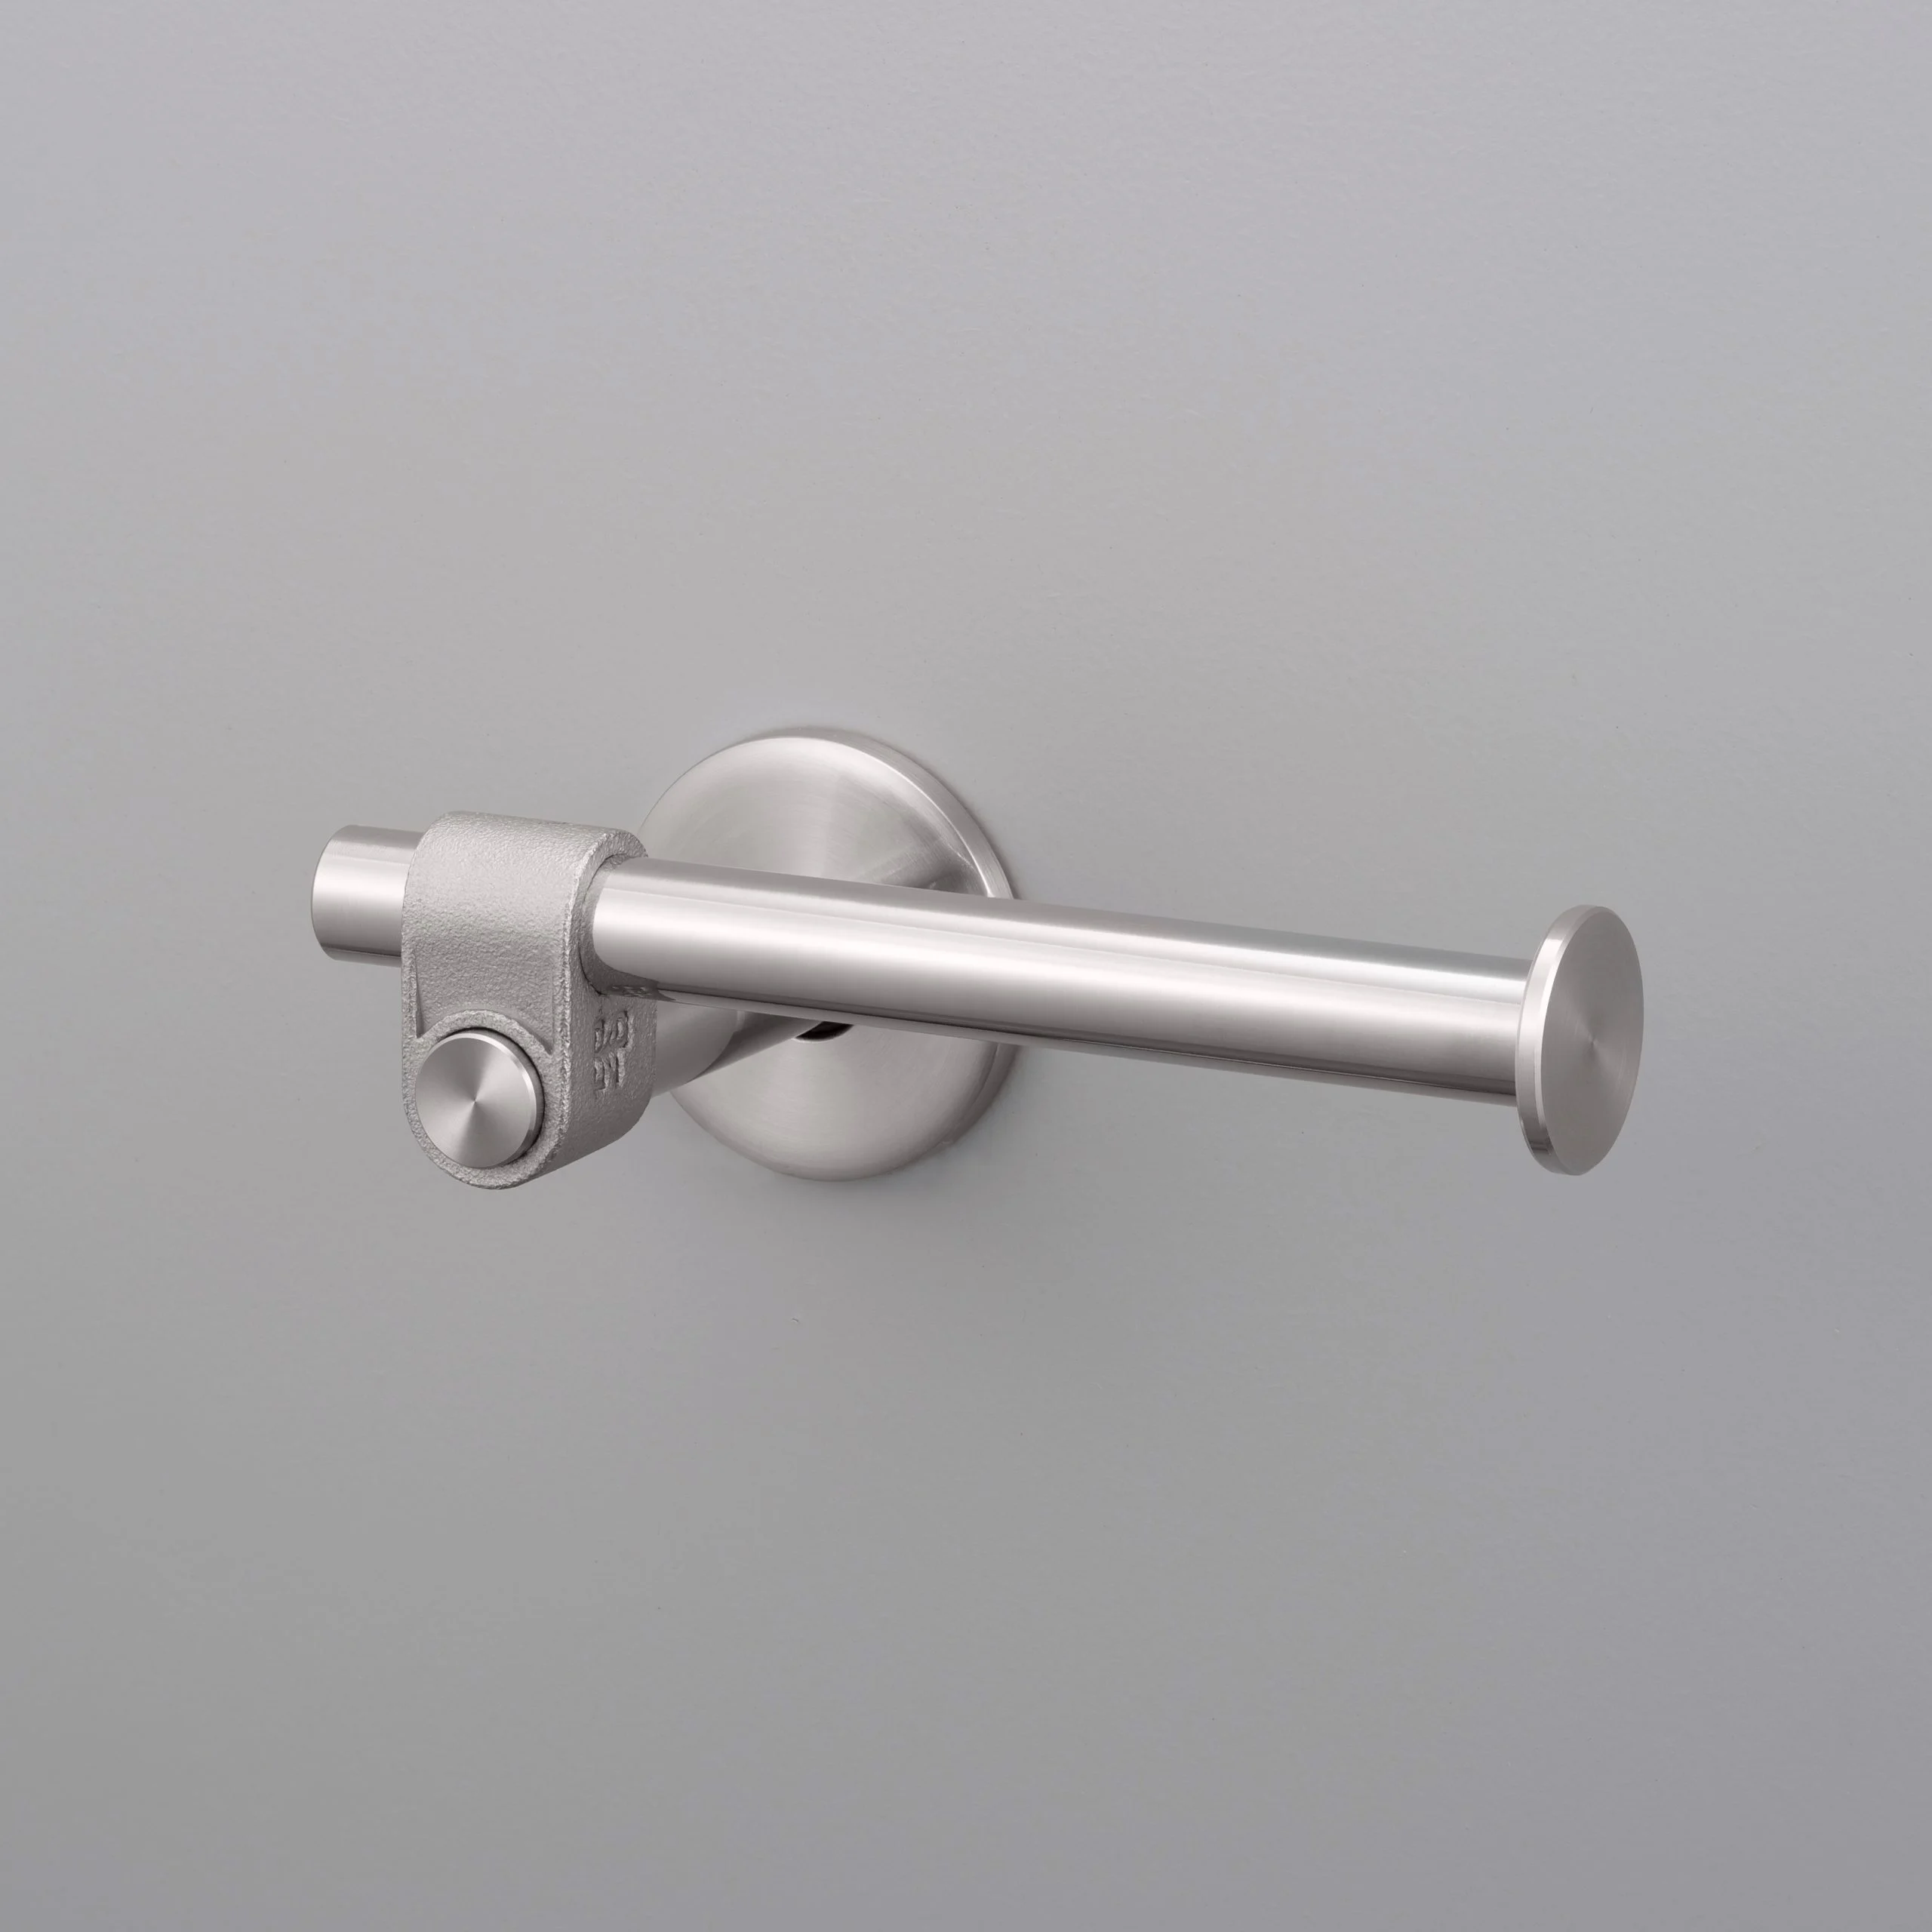 BP_Cast_Toilet_Roll_Holder_Steel_A2_Web-scaled